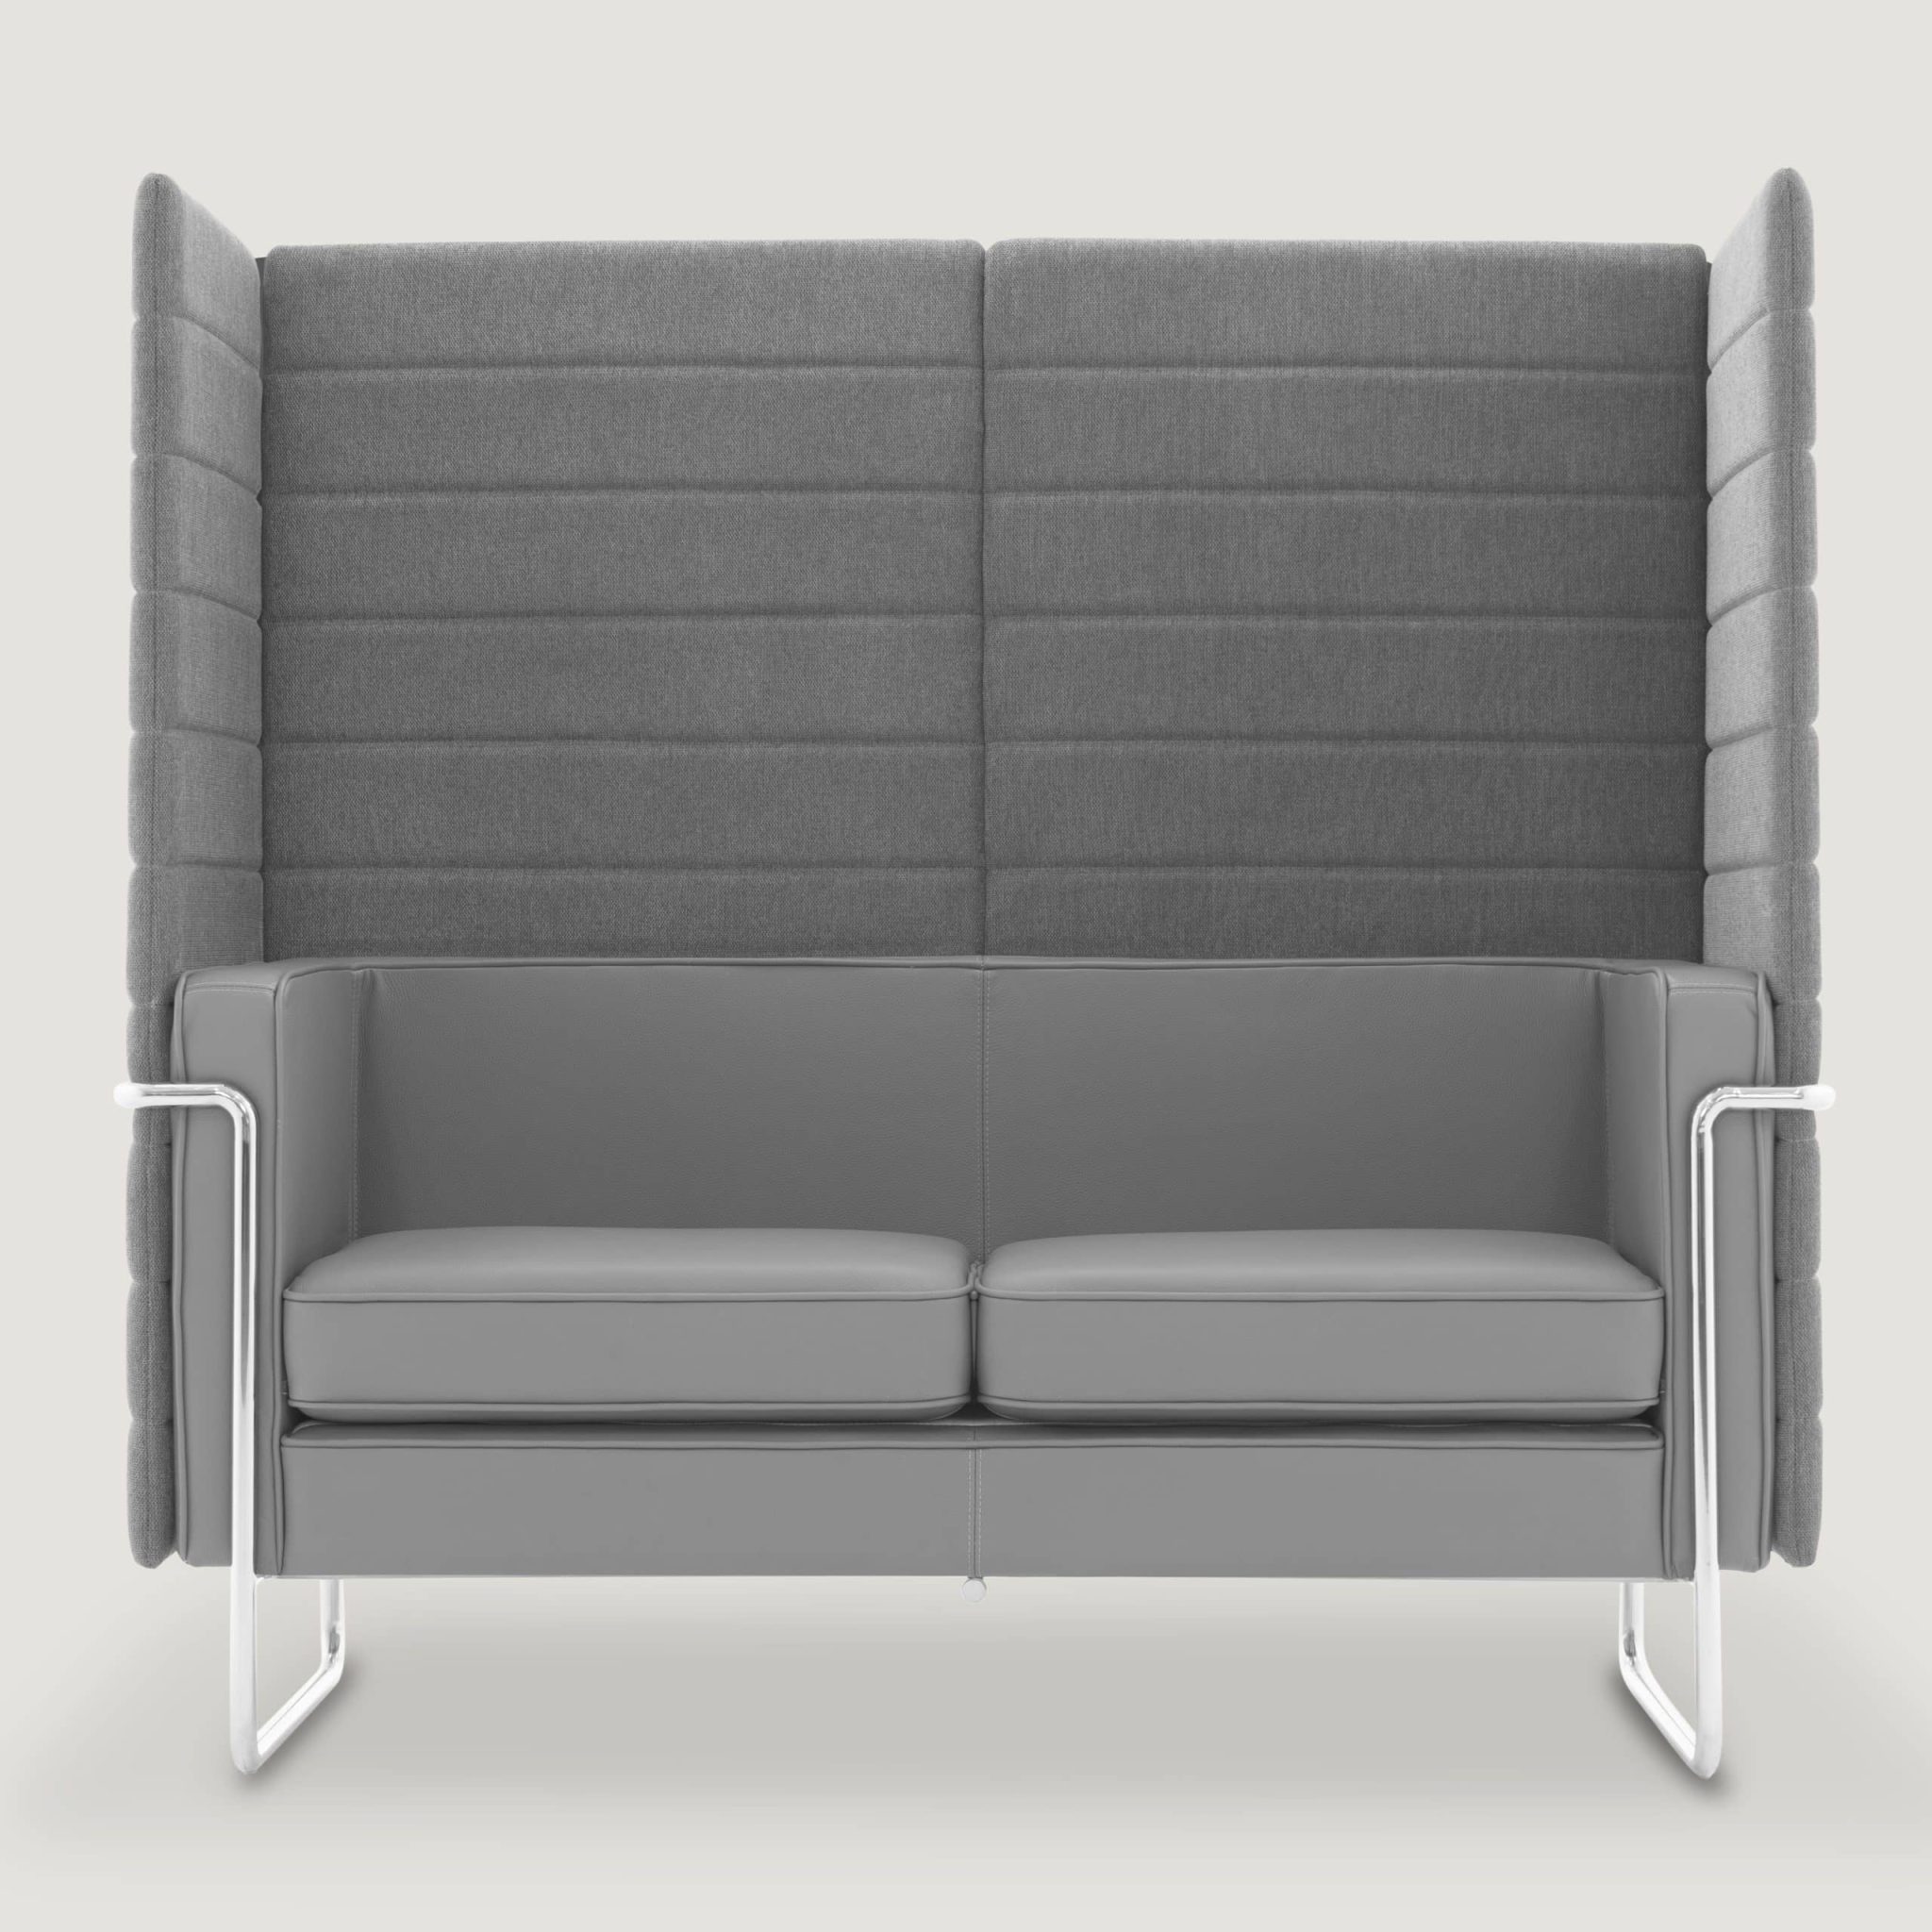 MO-150-Bay-Sofa_Cement-Grey-Leather_1-scaled-1.jpg